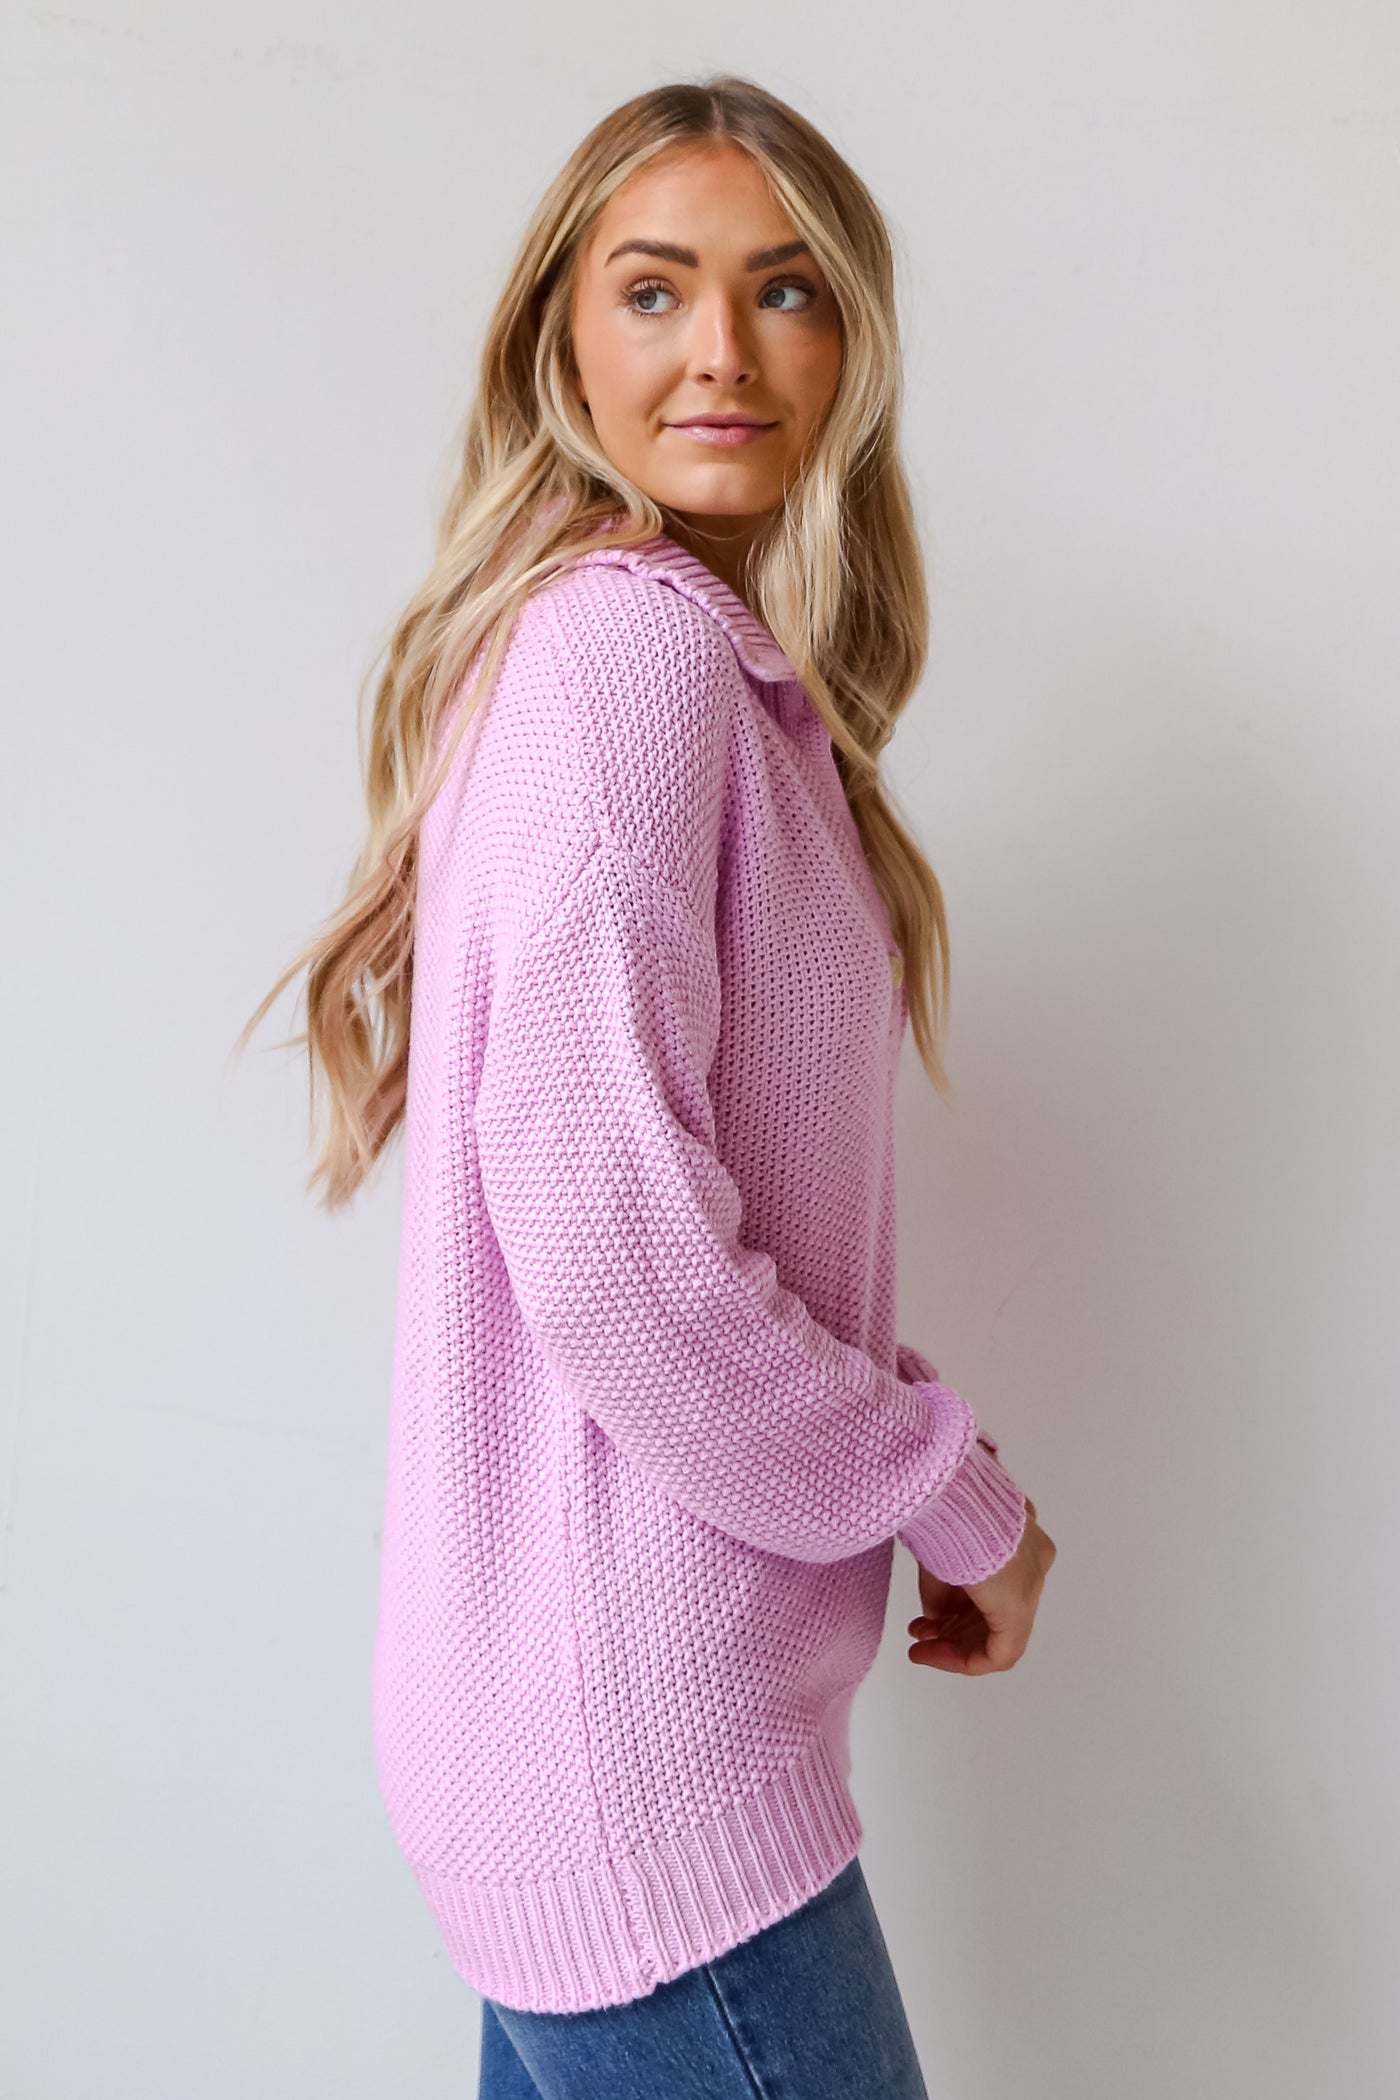 purple Collared Oversized Sweater side view